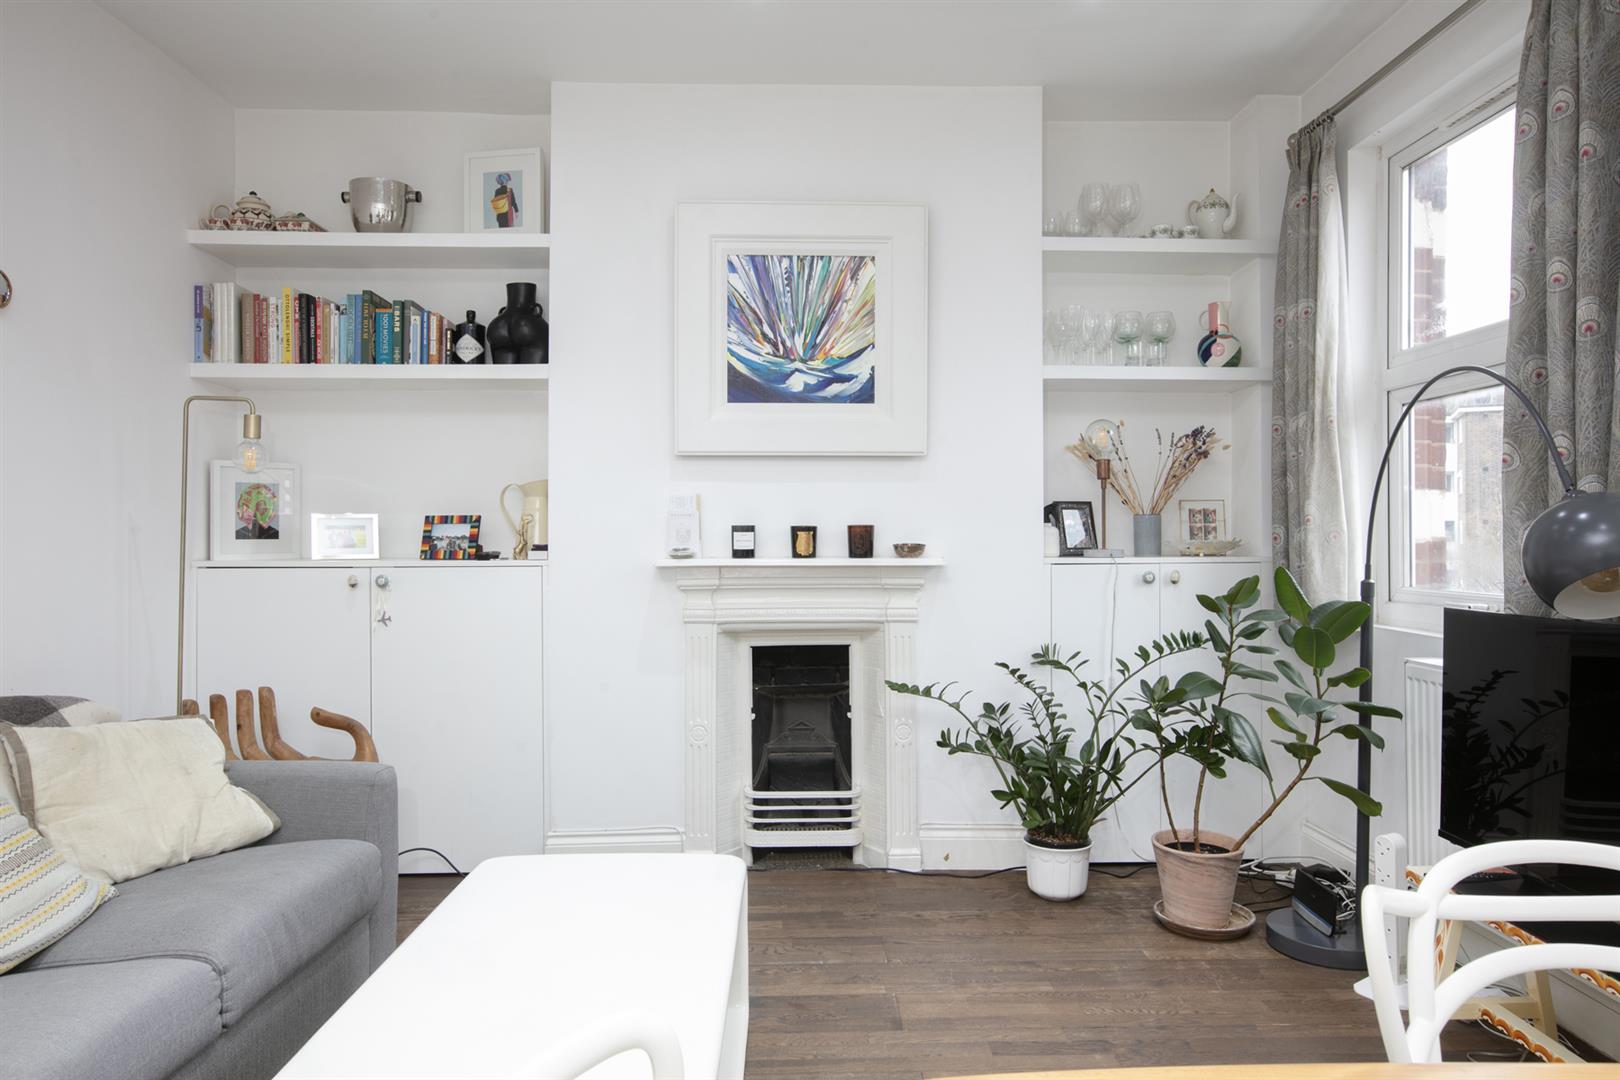 Flat - Conversion For Sale in Coldharbour Lane, Camberwell, SE5 1178 view5